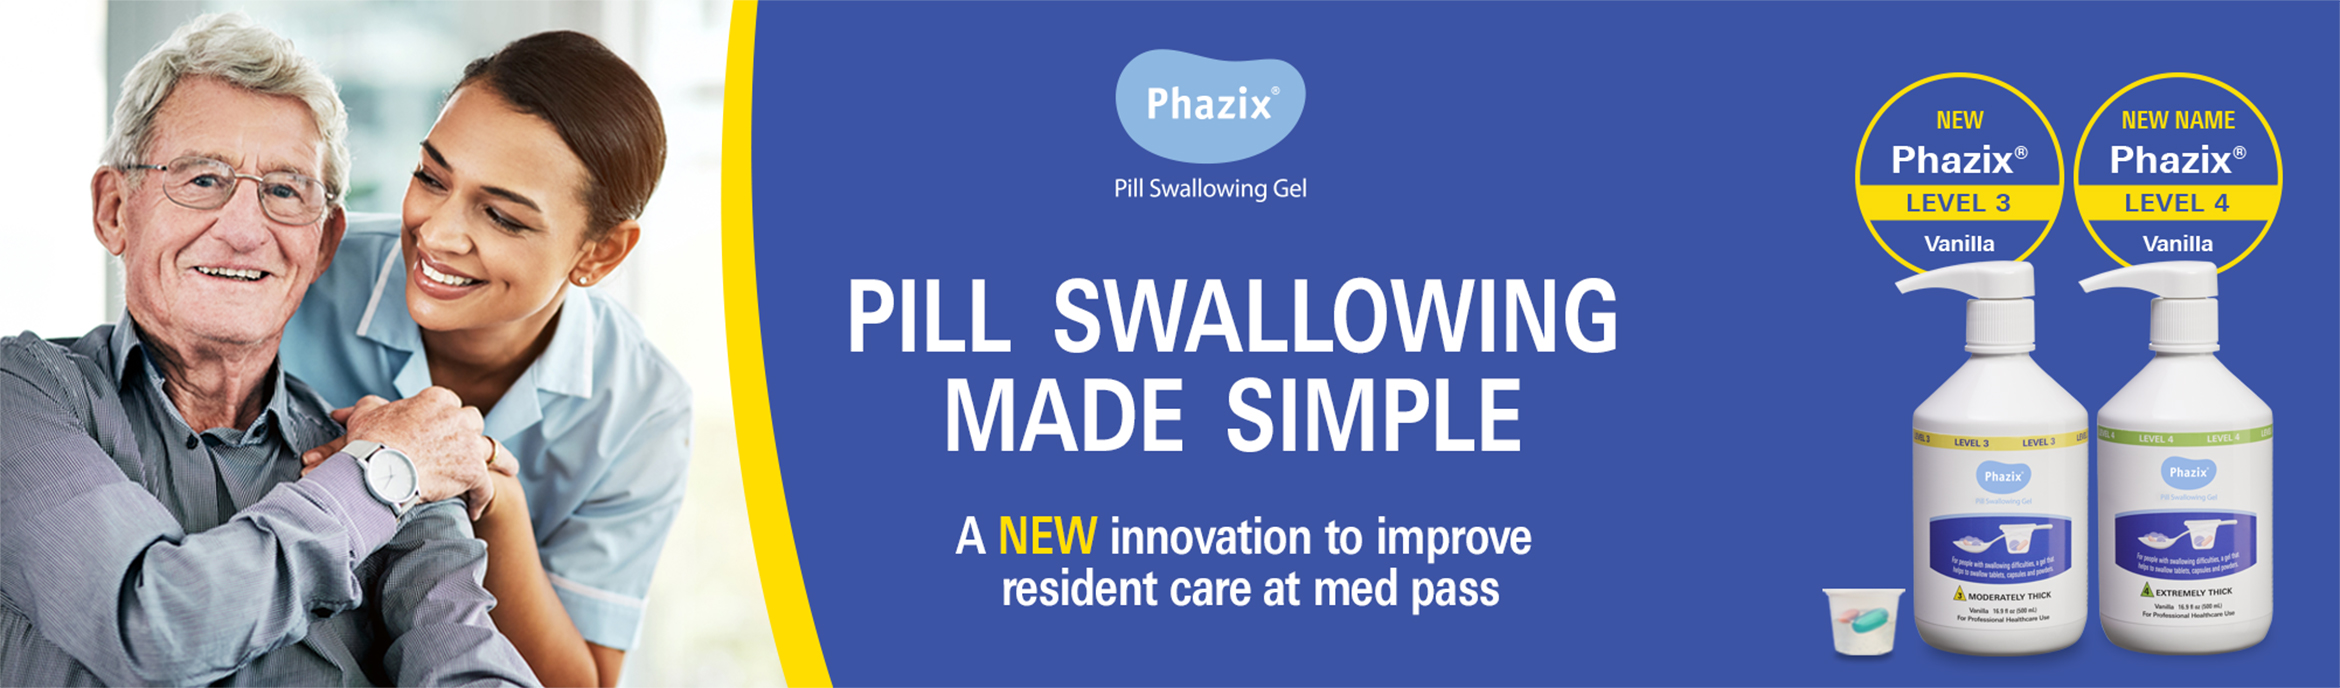 Phazix - Pill swallowing made simple - Banner